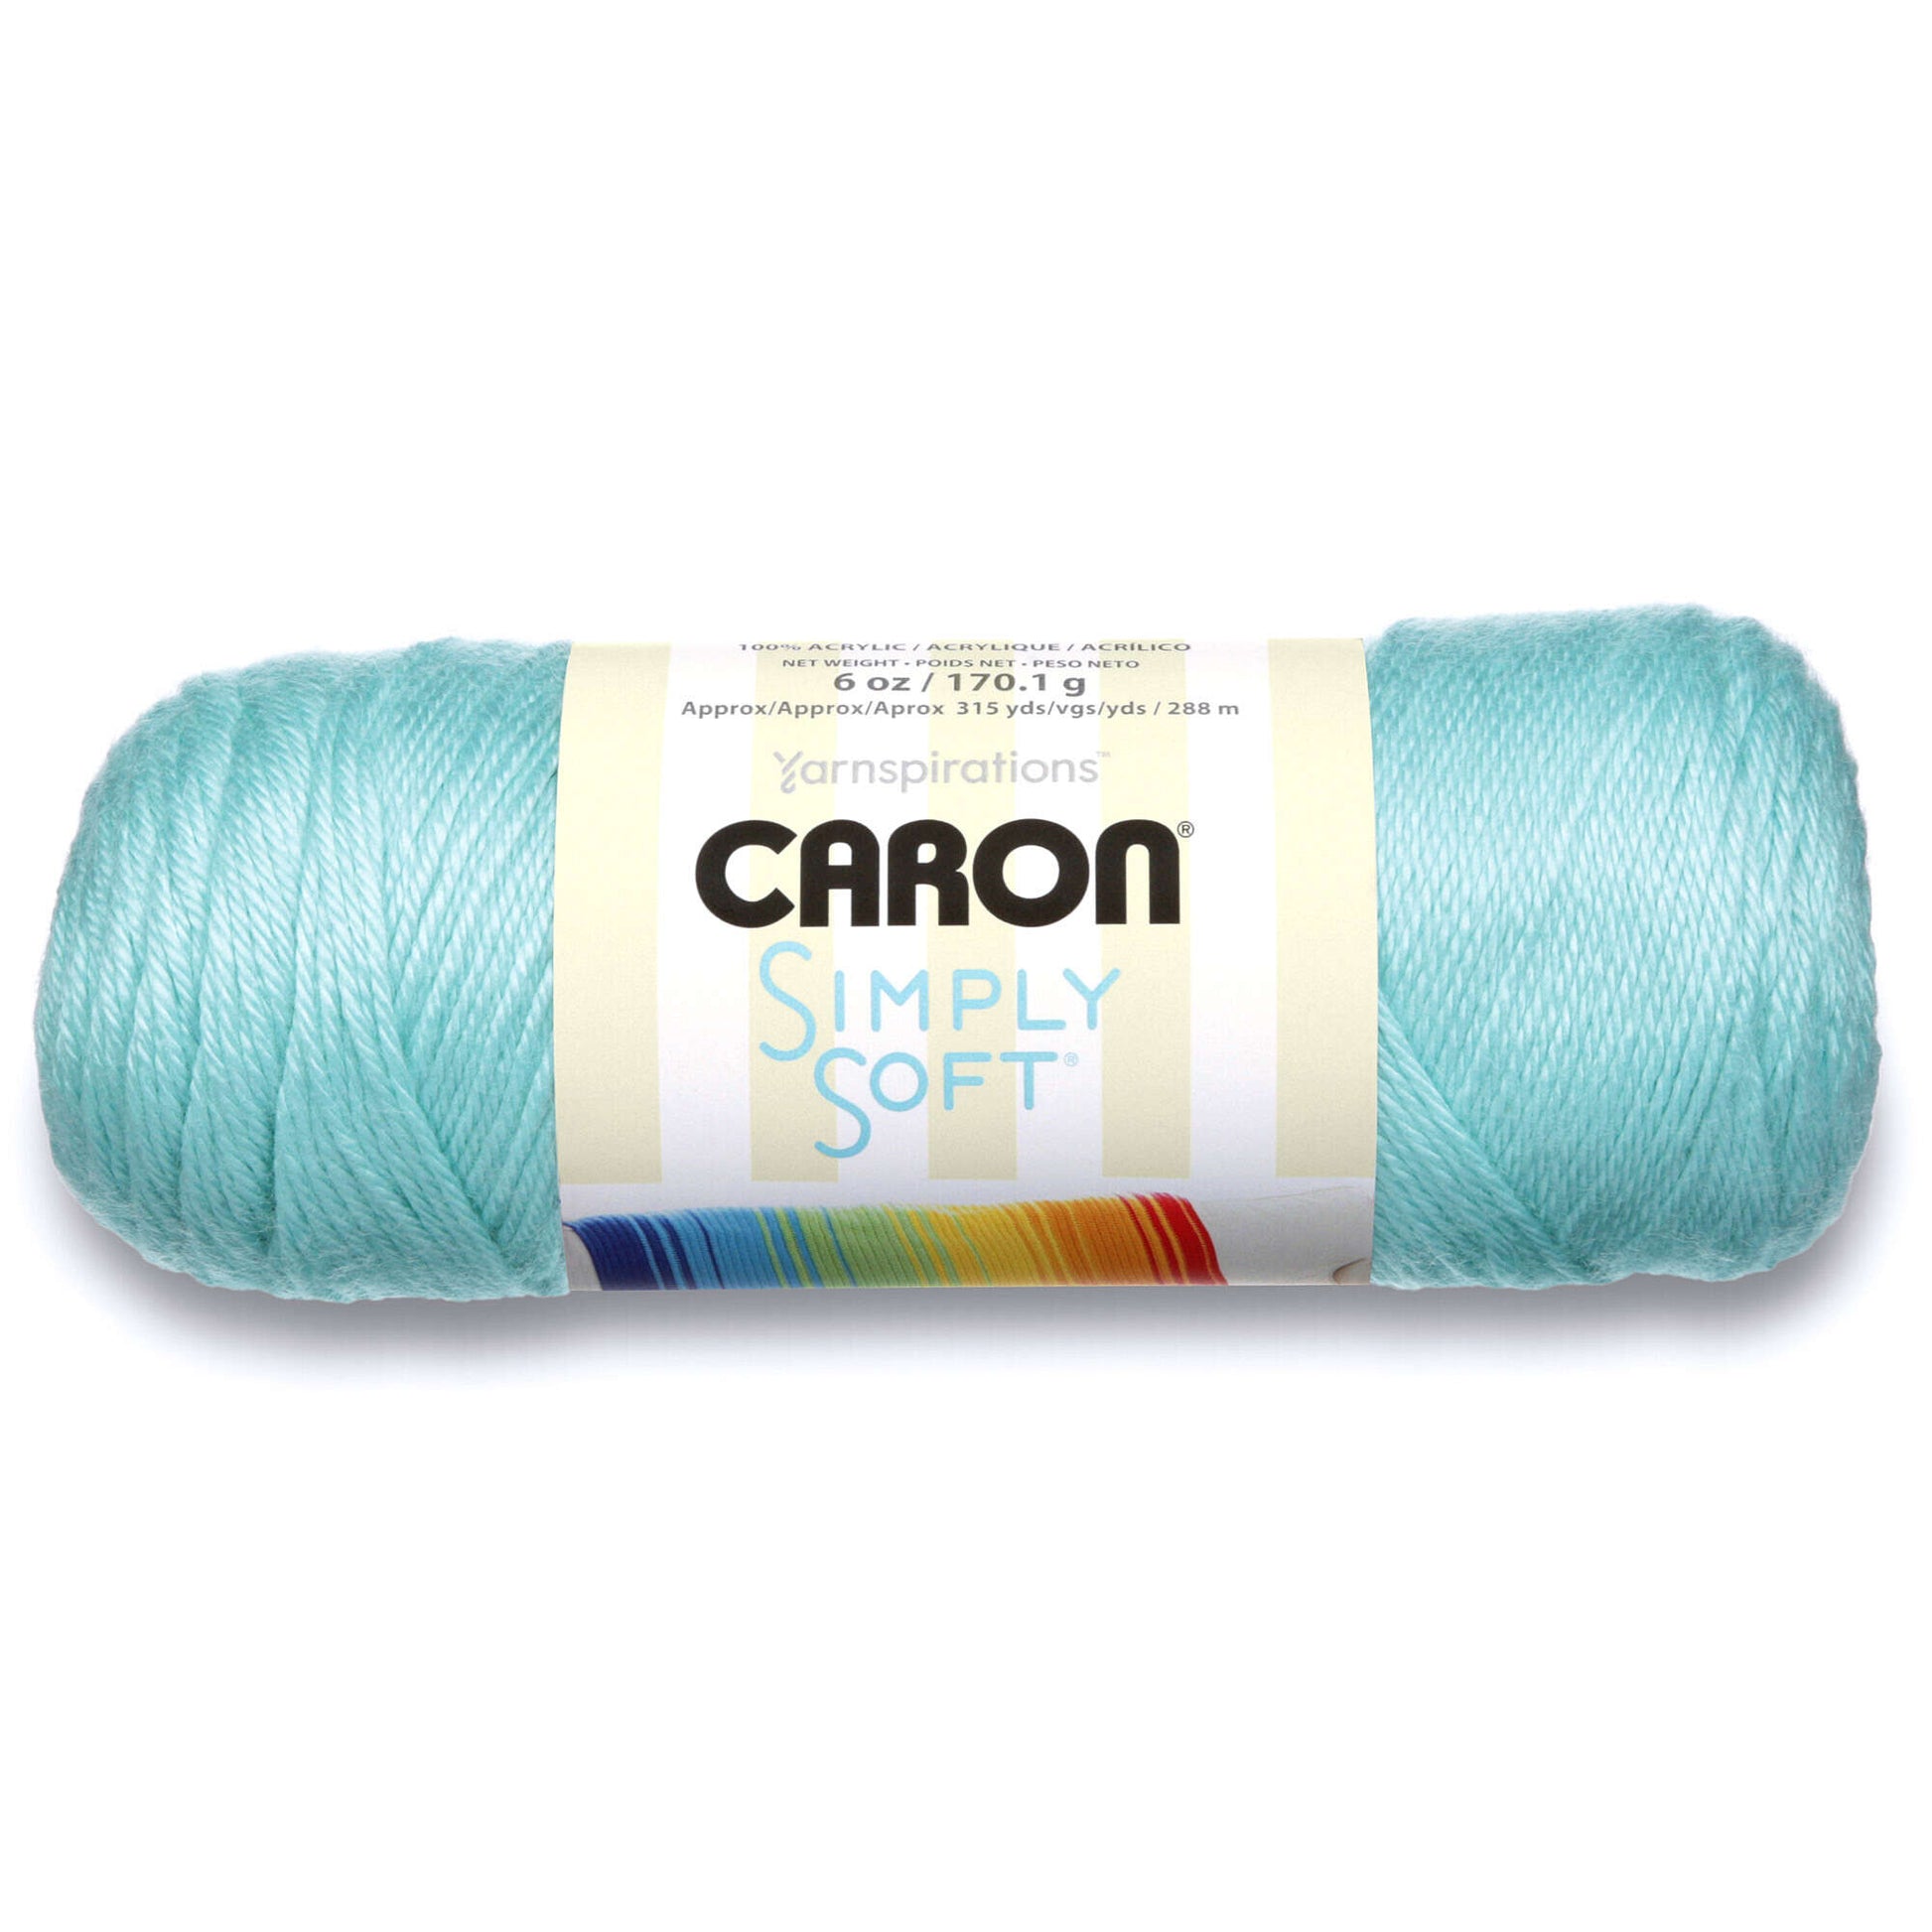 Caron - Criss Cross Vest in Simply Soft (downloadable PDF) - Wool Warehouse  - Buy Yarn, Wool, Needles & Other Knitting Supplies Online!